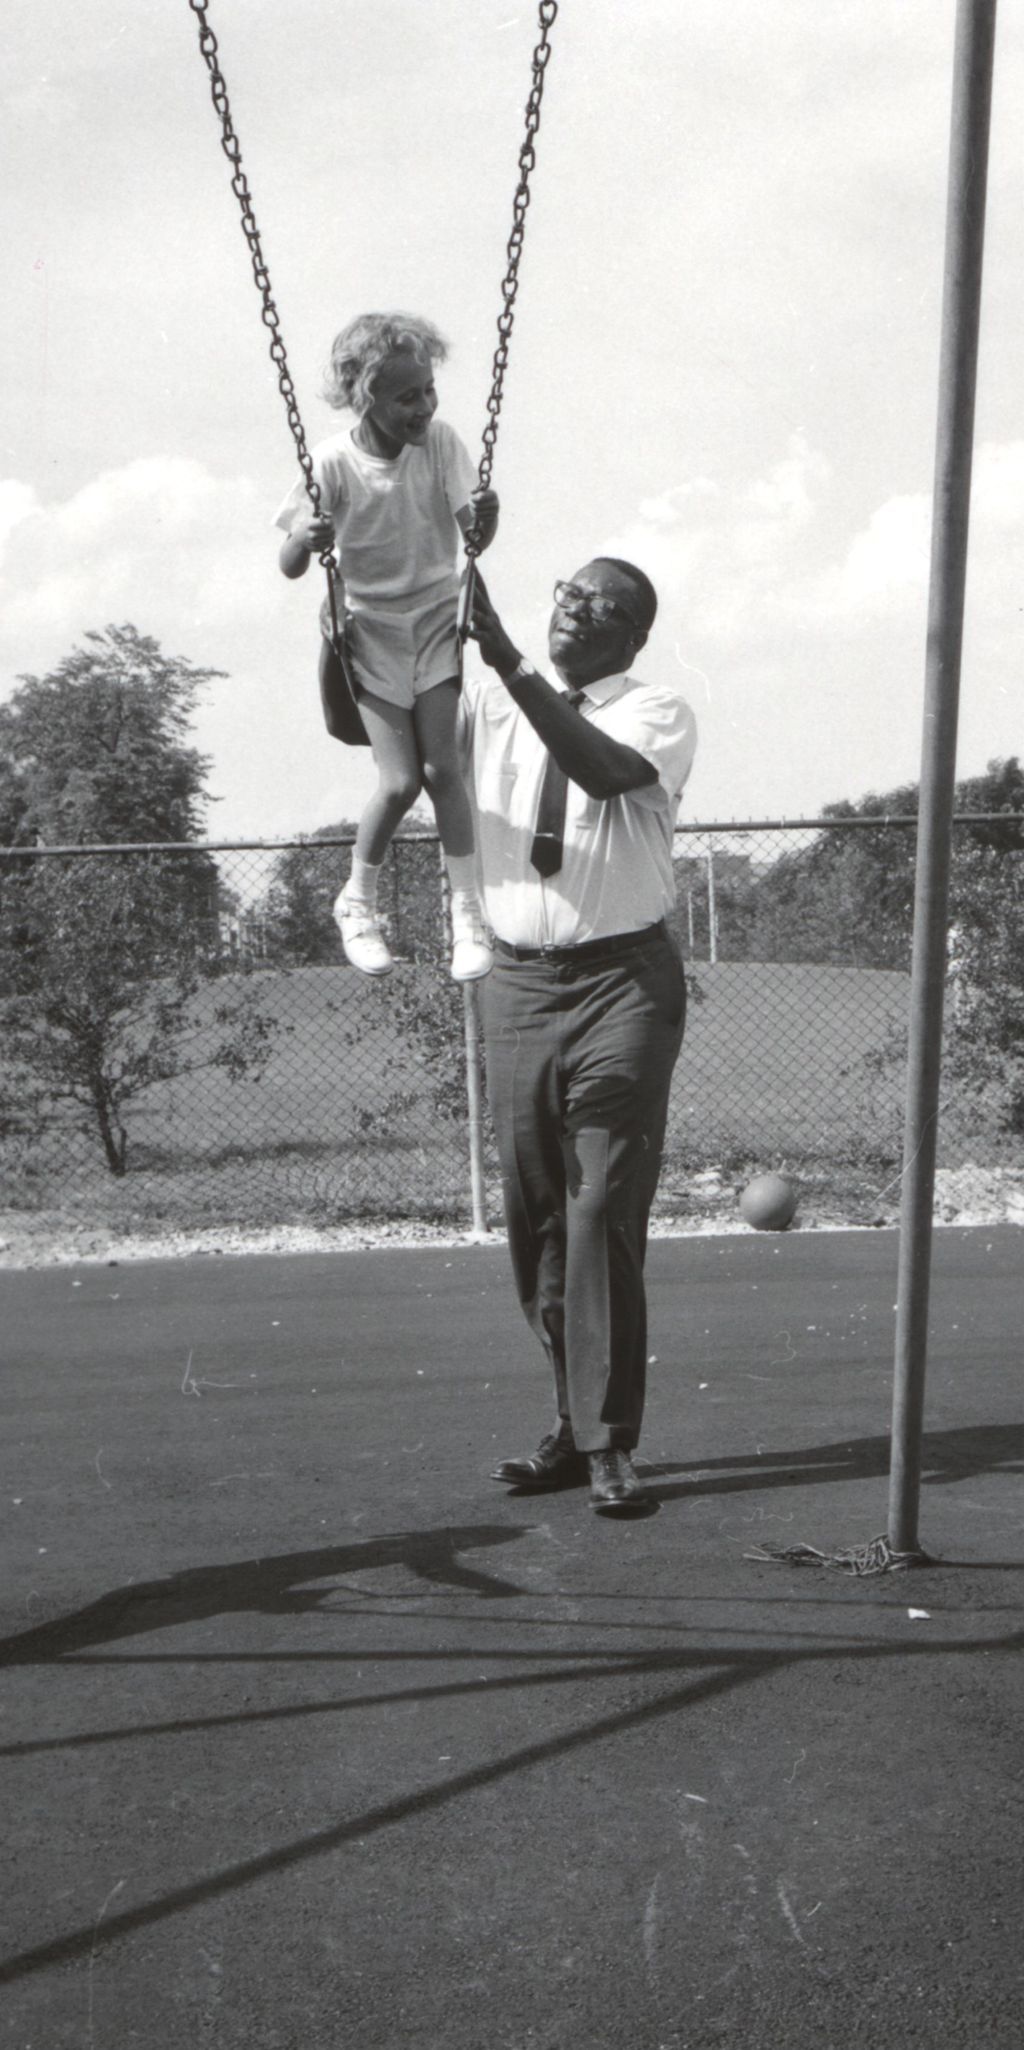 Man pushing a child on a swing